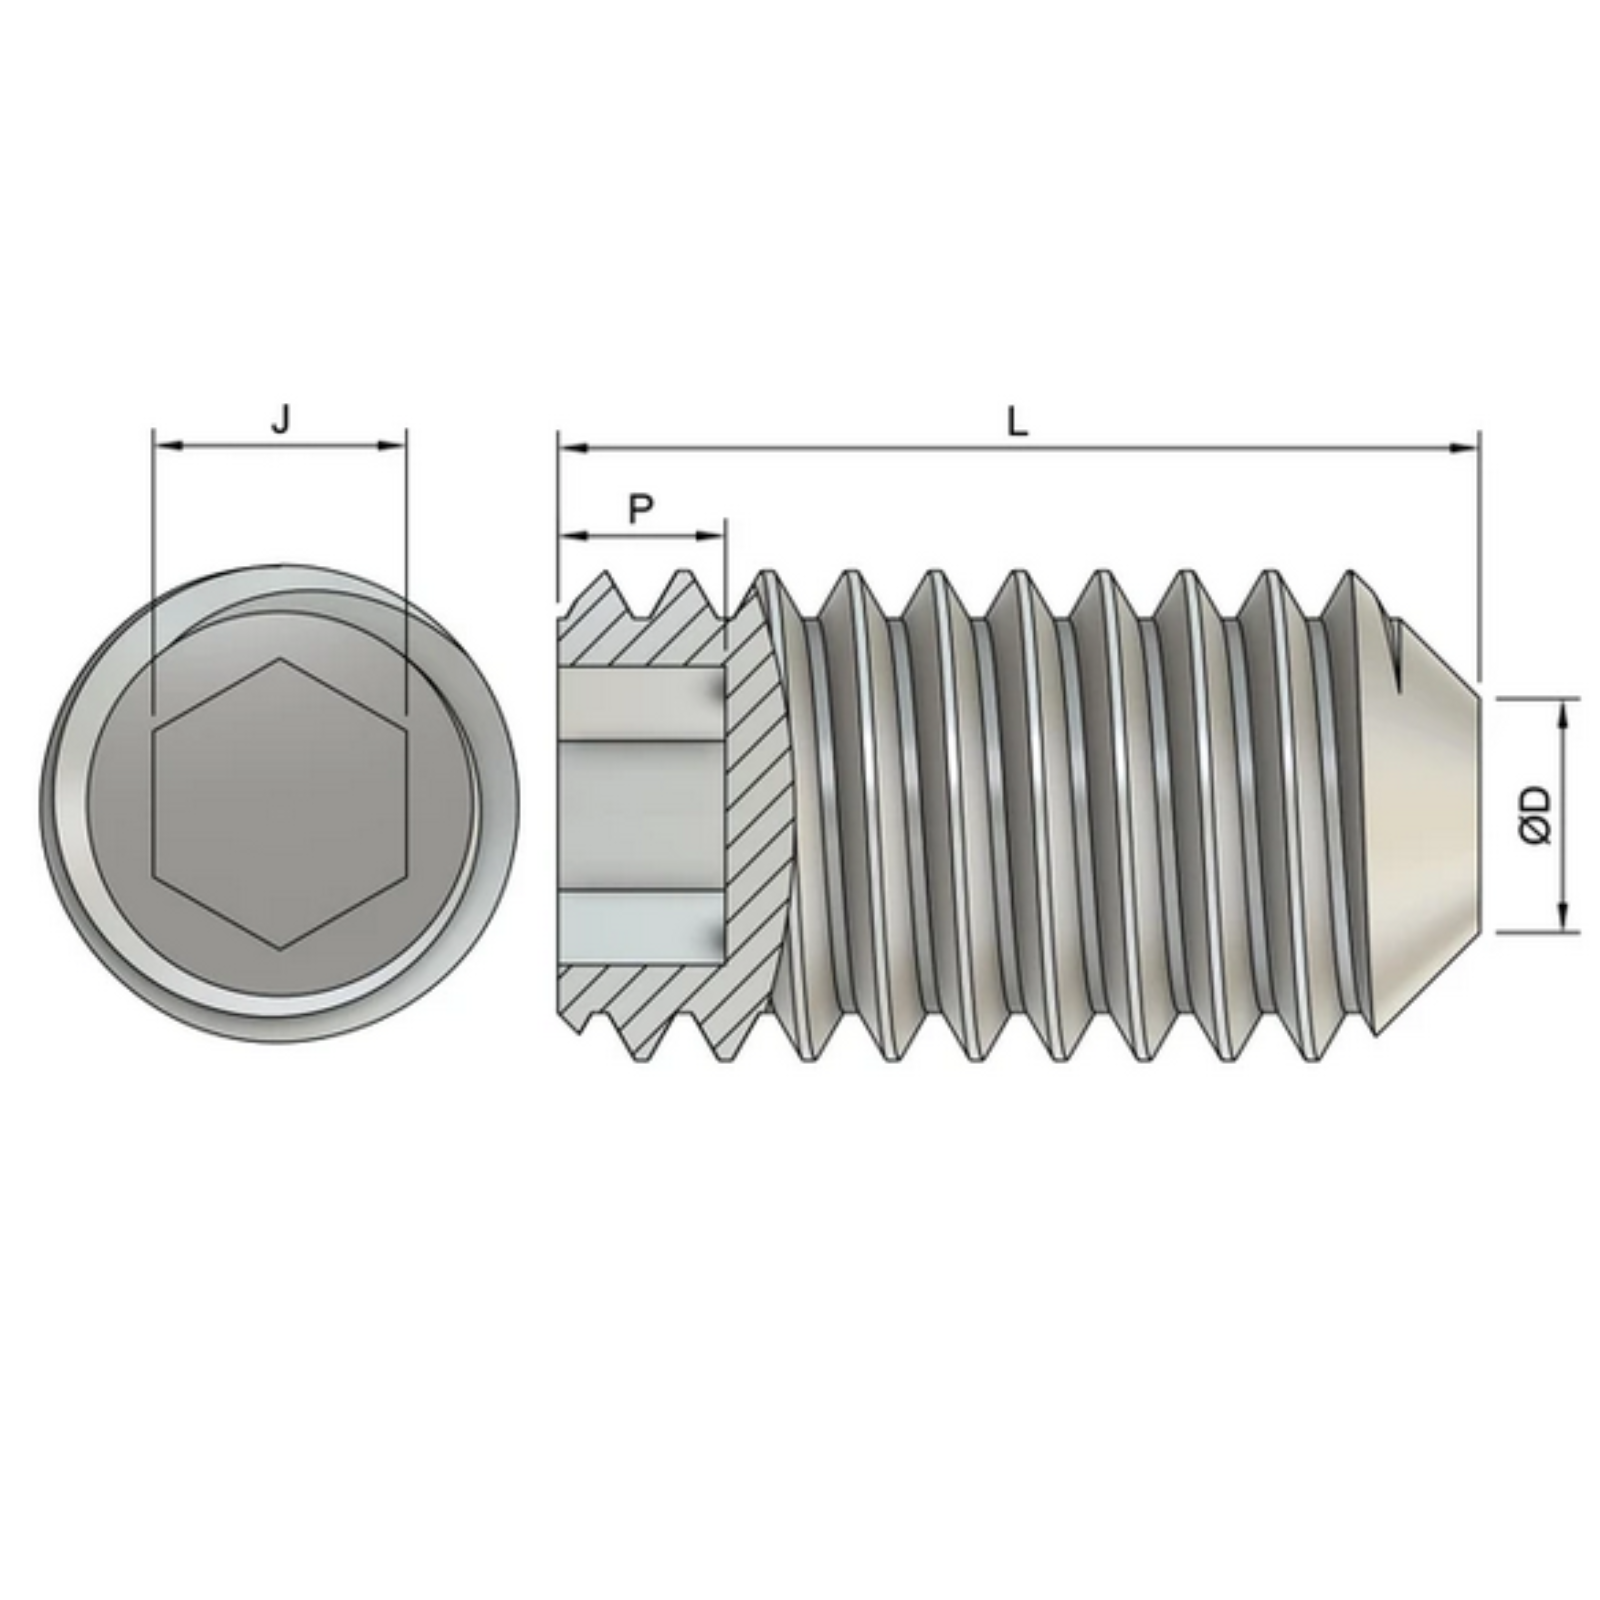 M2.5 Cup Point Set / Grub Screws (DIN 916) - Stainless Steel (A2)